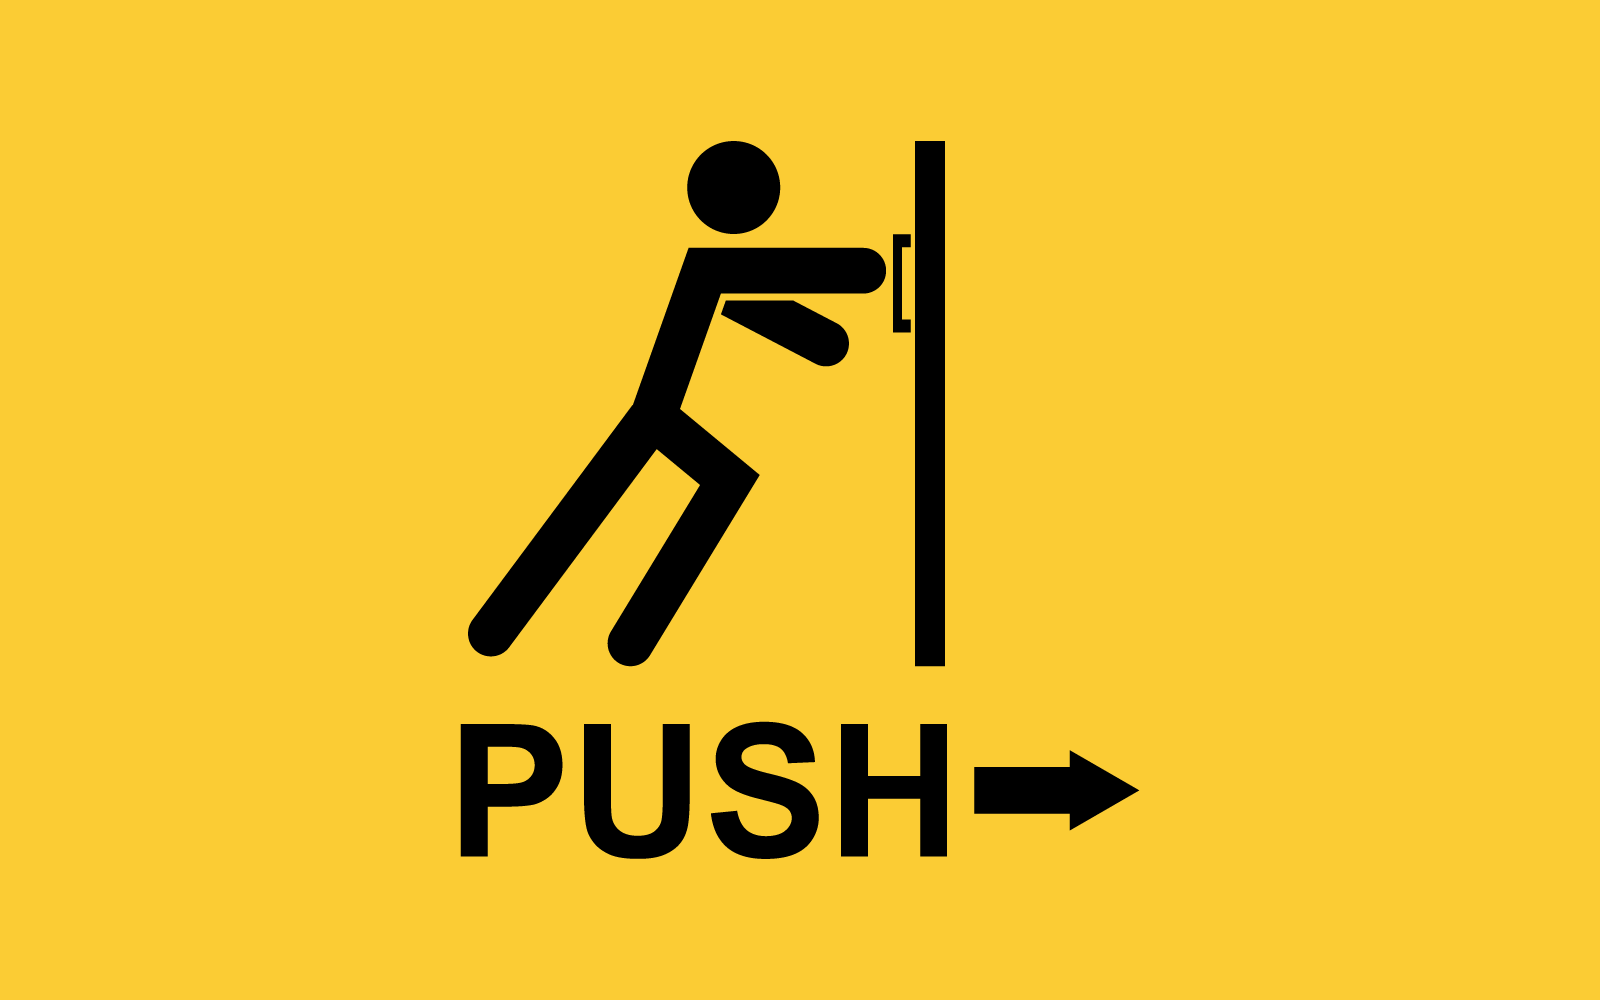 Push and pull door icon vector flat design